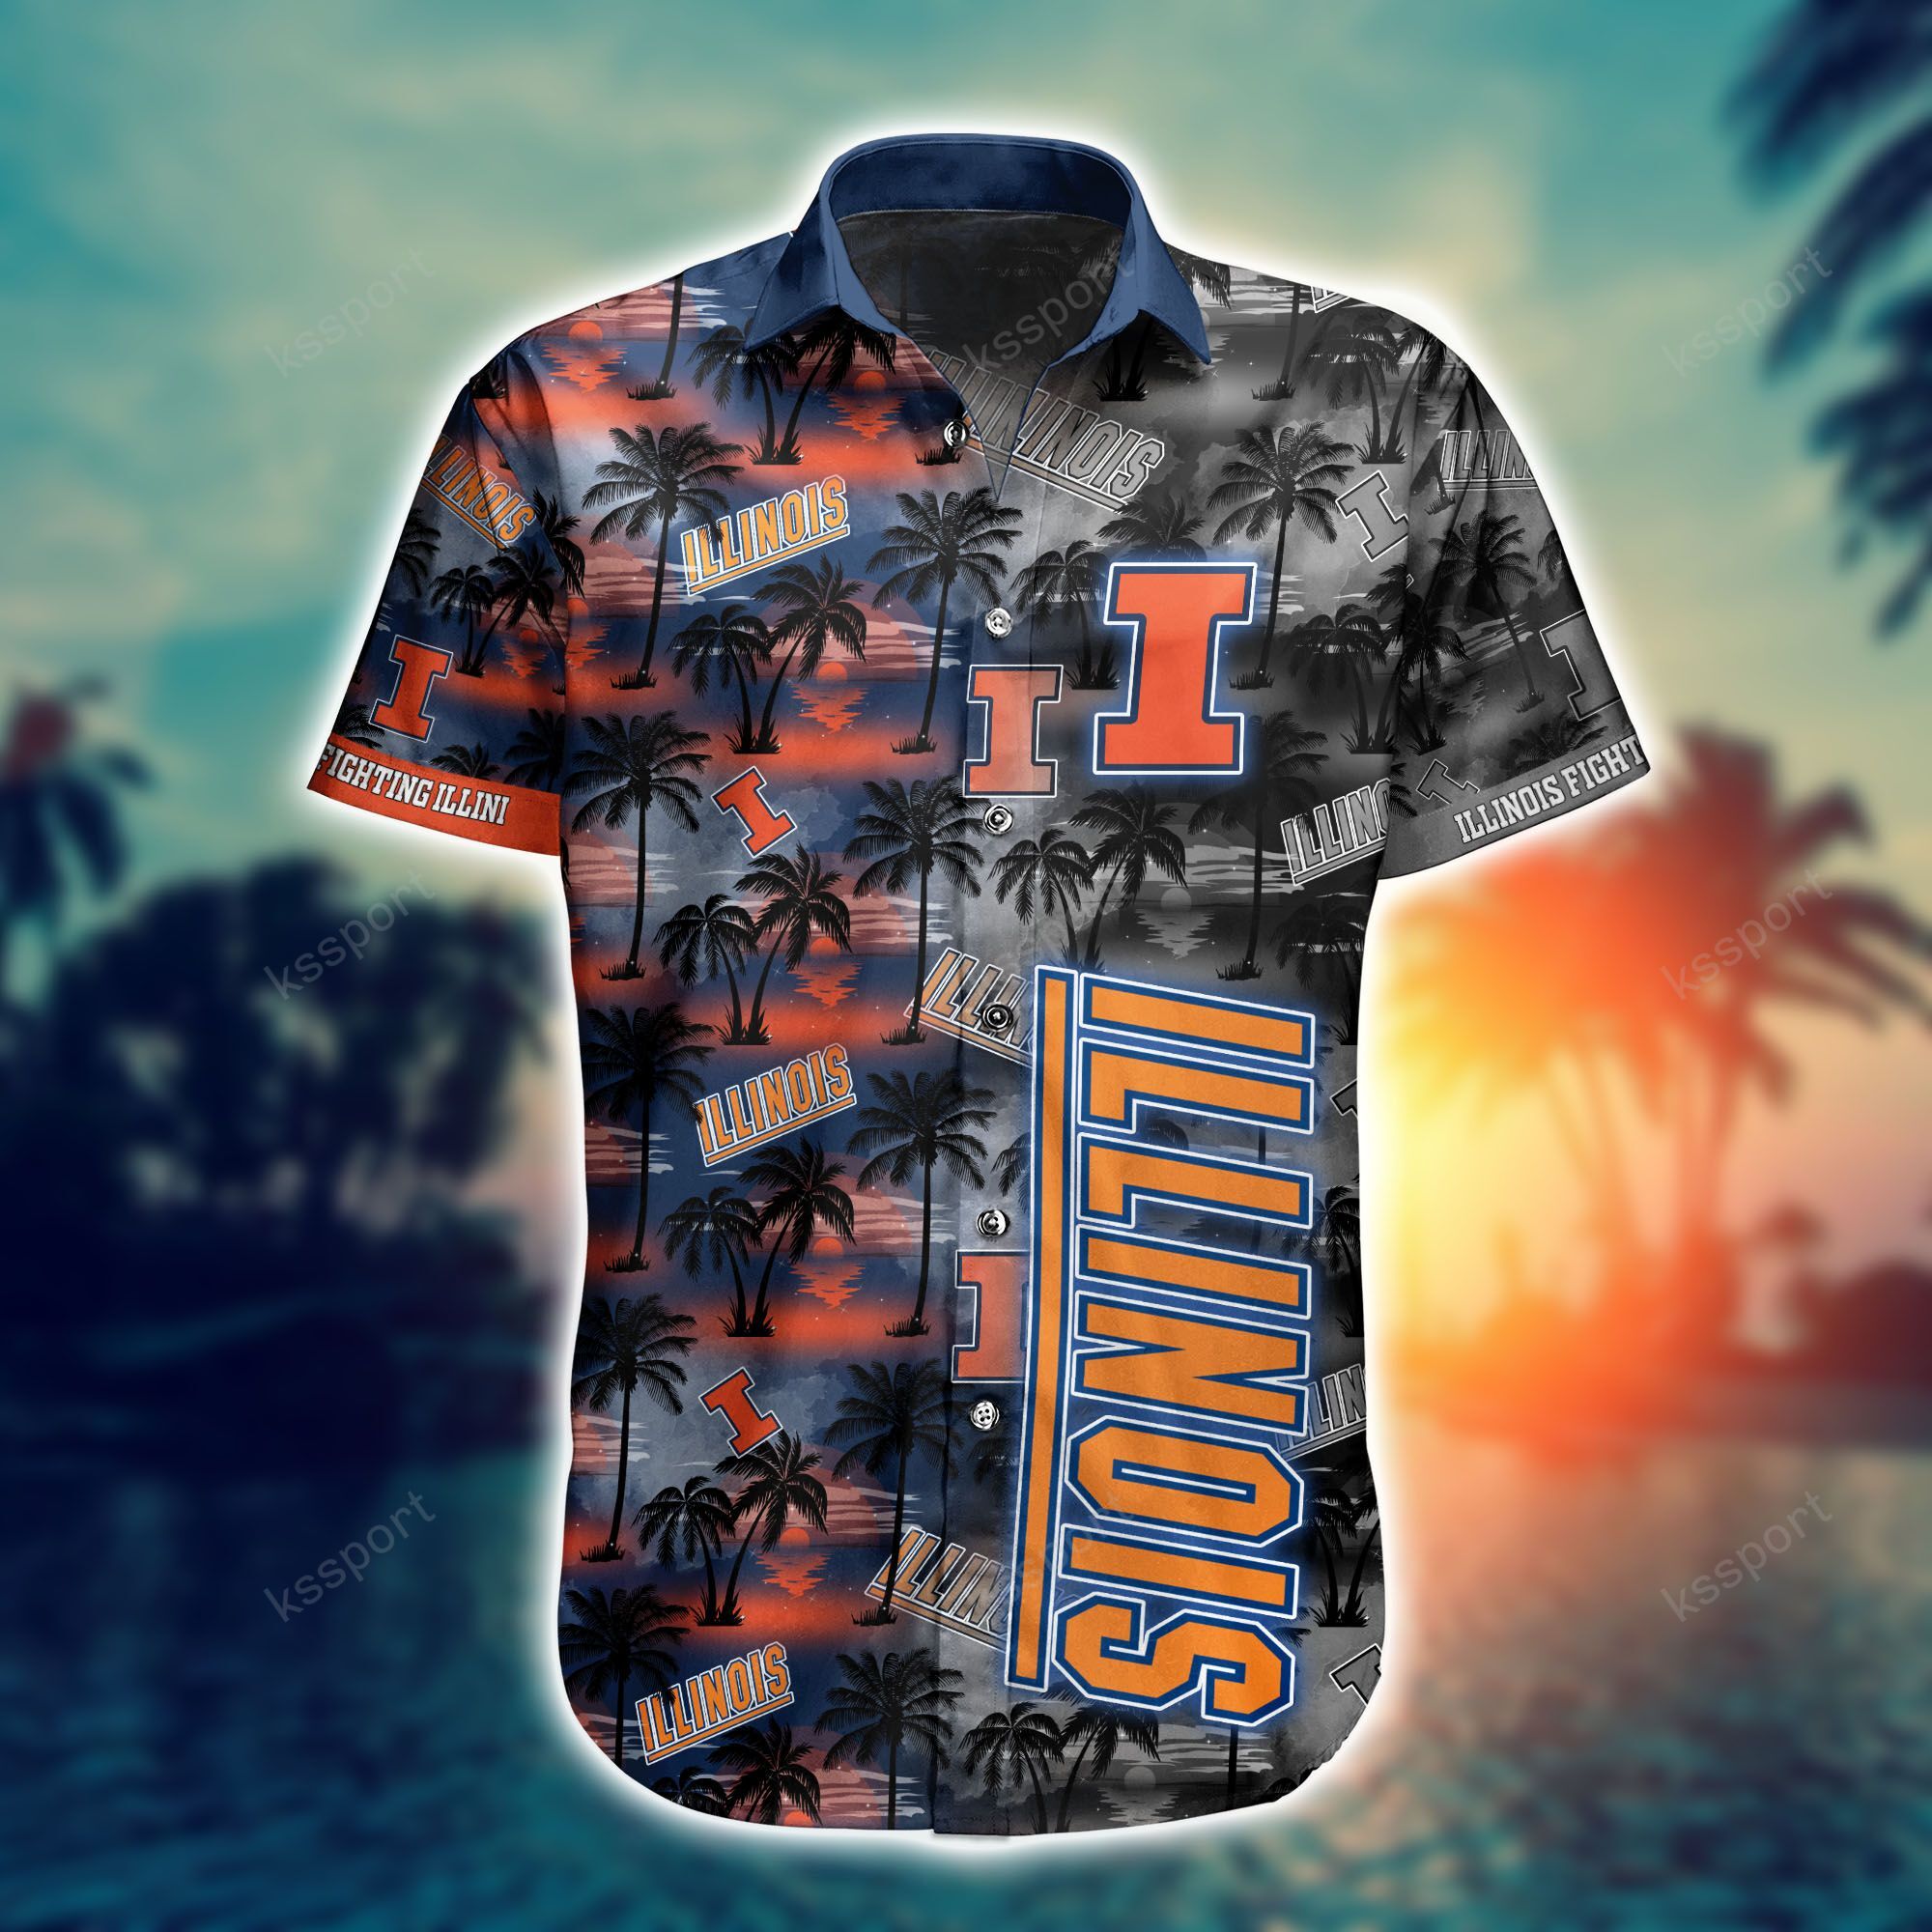 Top cool Hawaiian shirt 2022 - Make sure you get yours today before they run out! 138